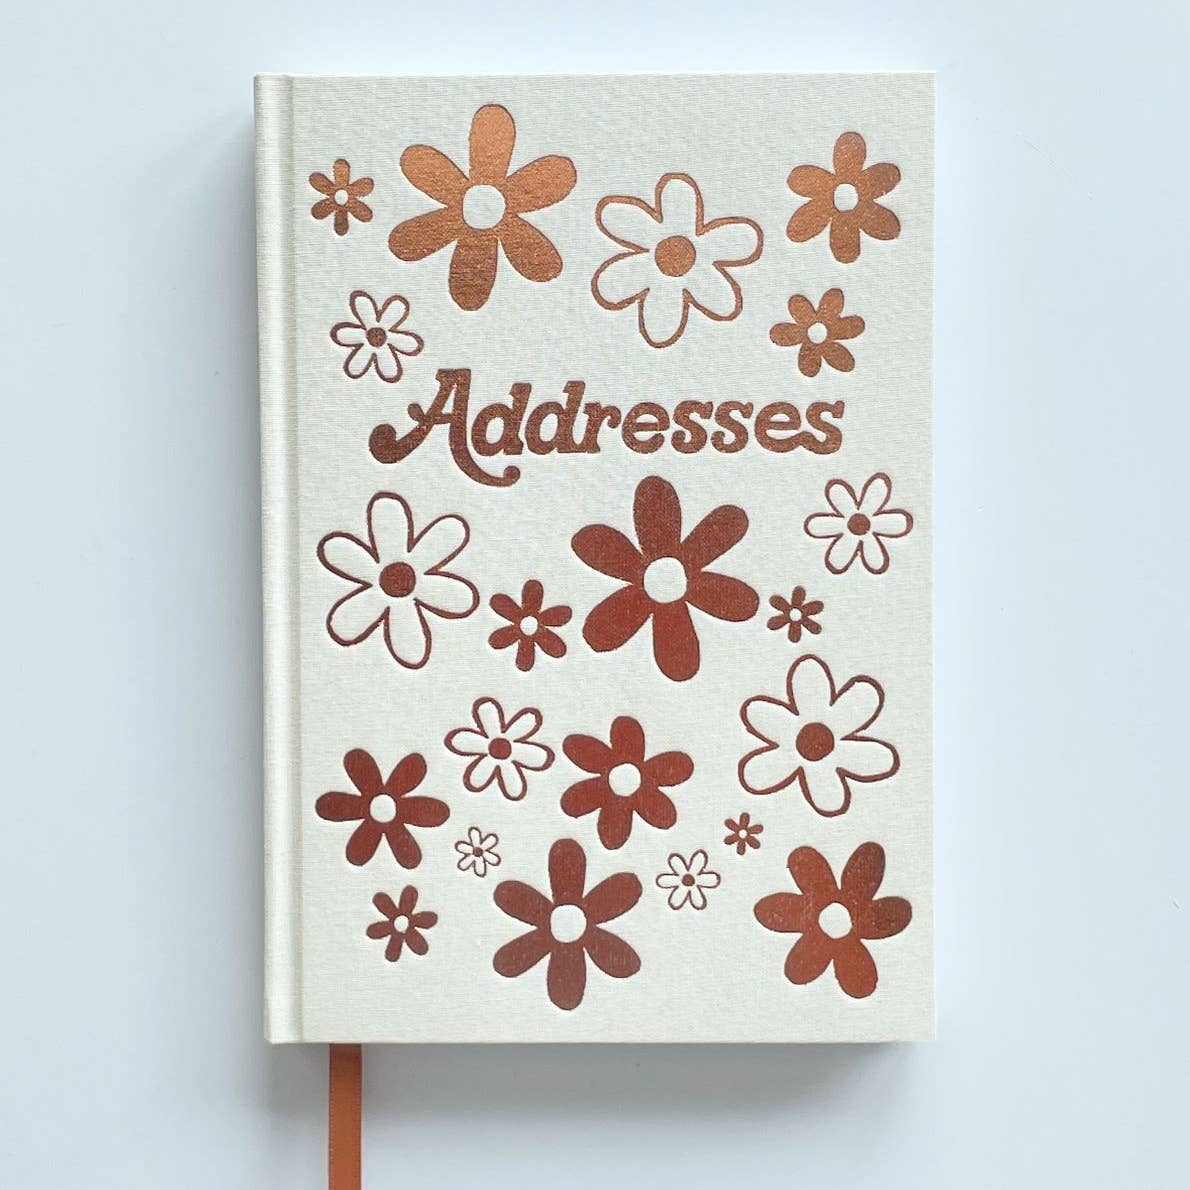 White background cover with images of rose gold flowers and text says, "Addresses".